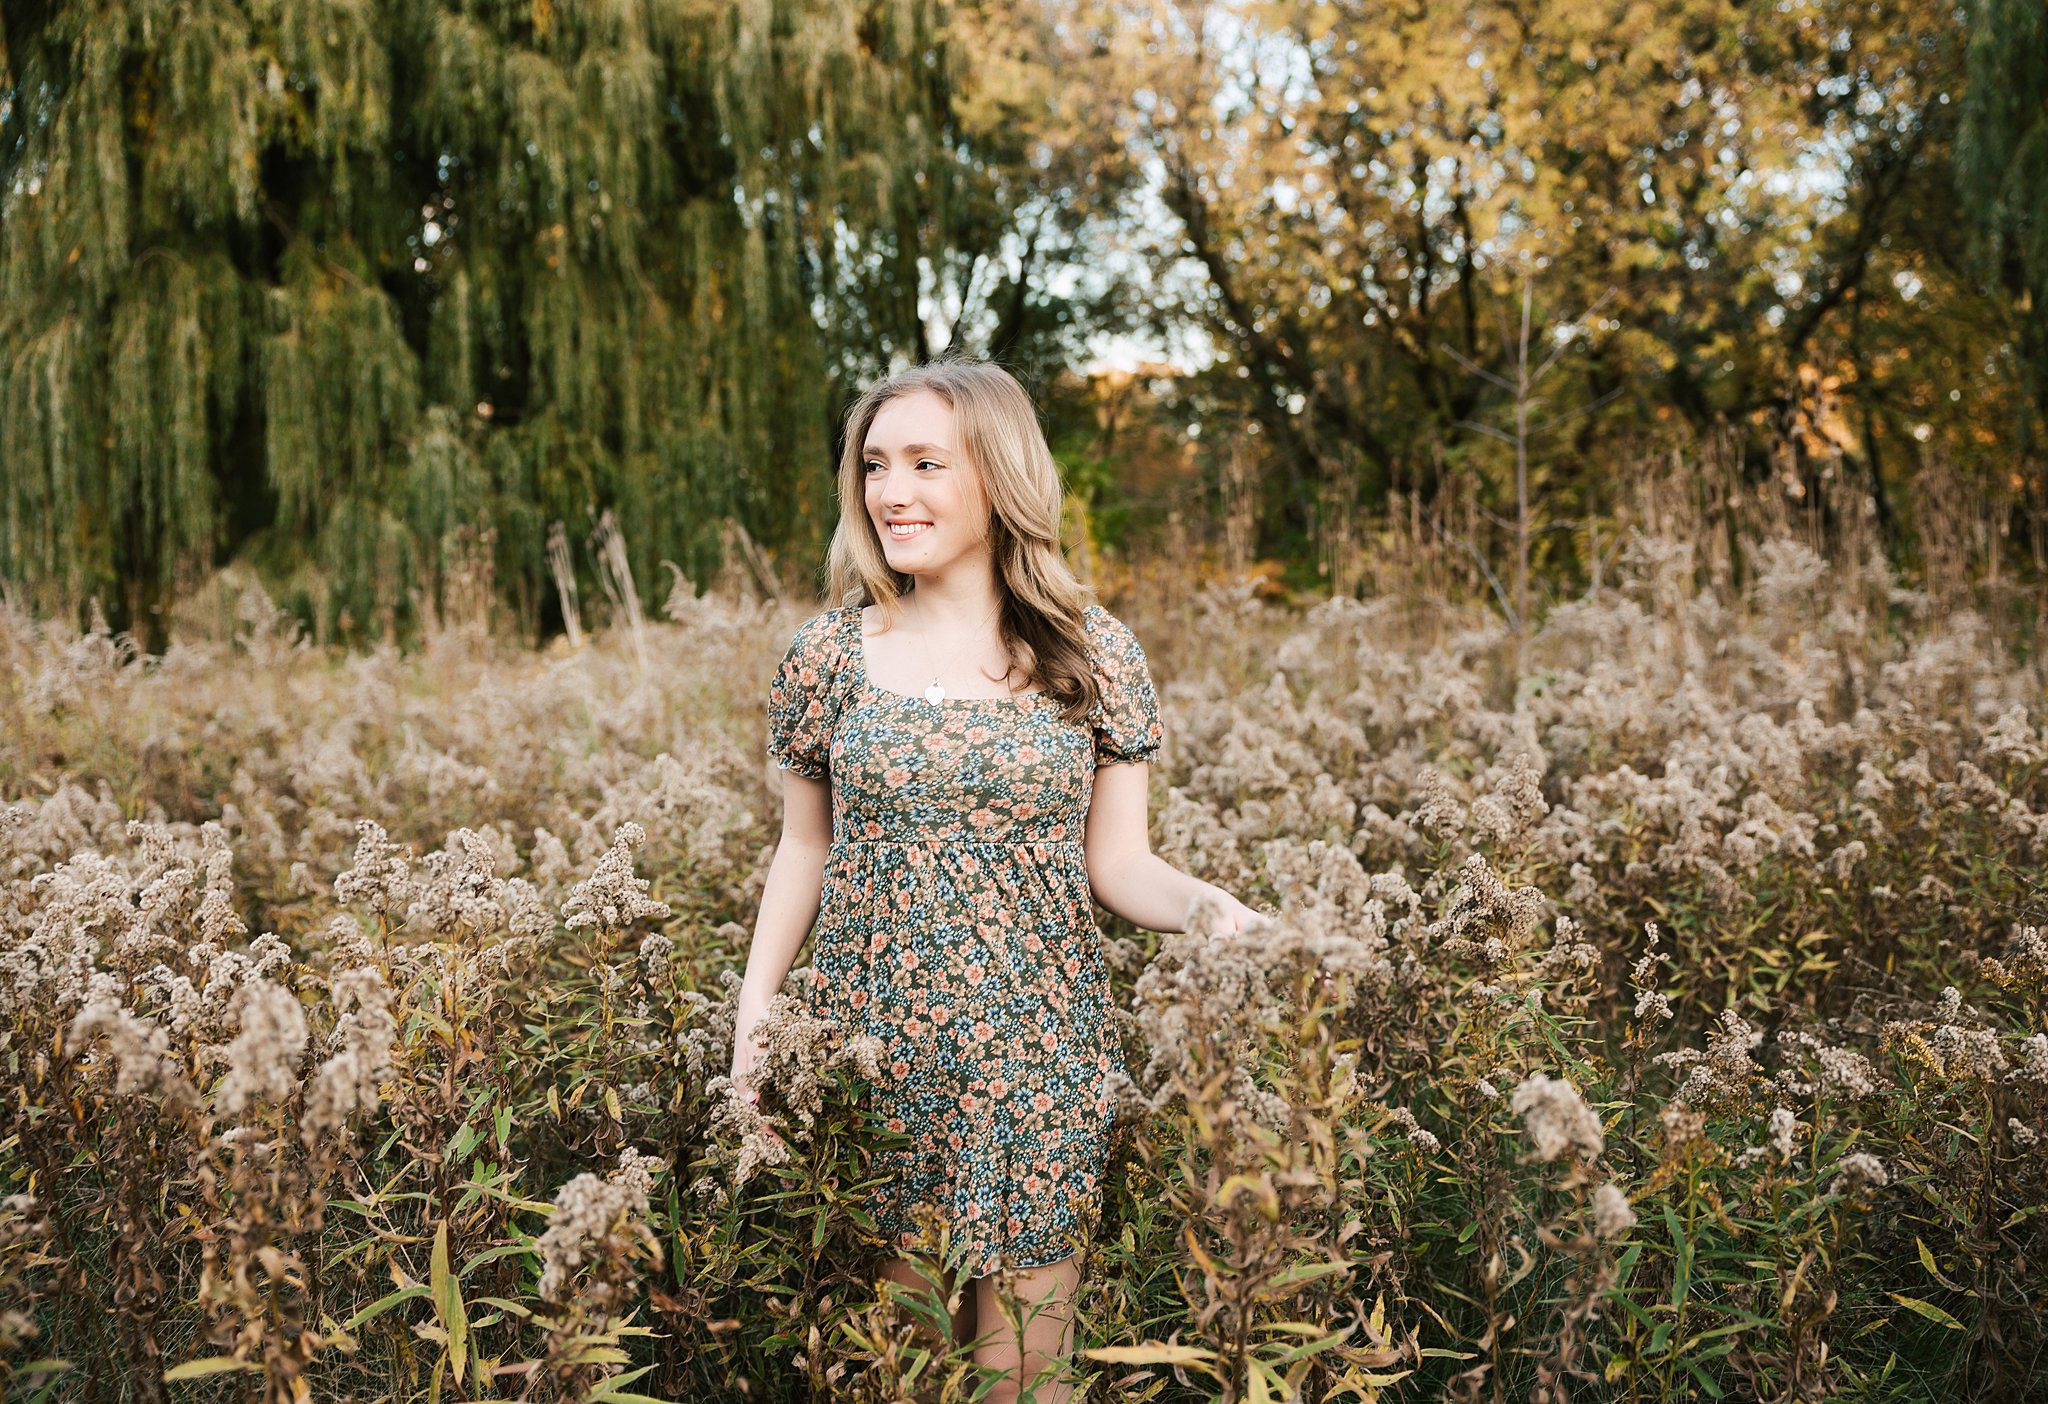 A high school senior in a floral print dress smiles while exploring some wildflowers at sunset